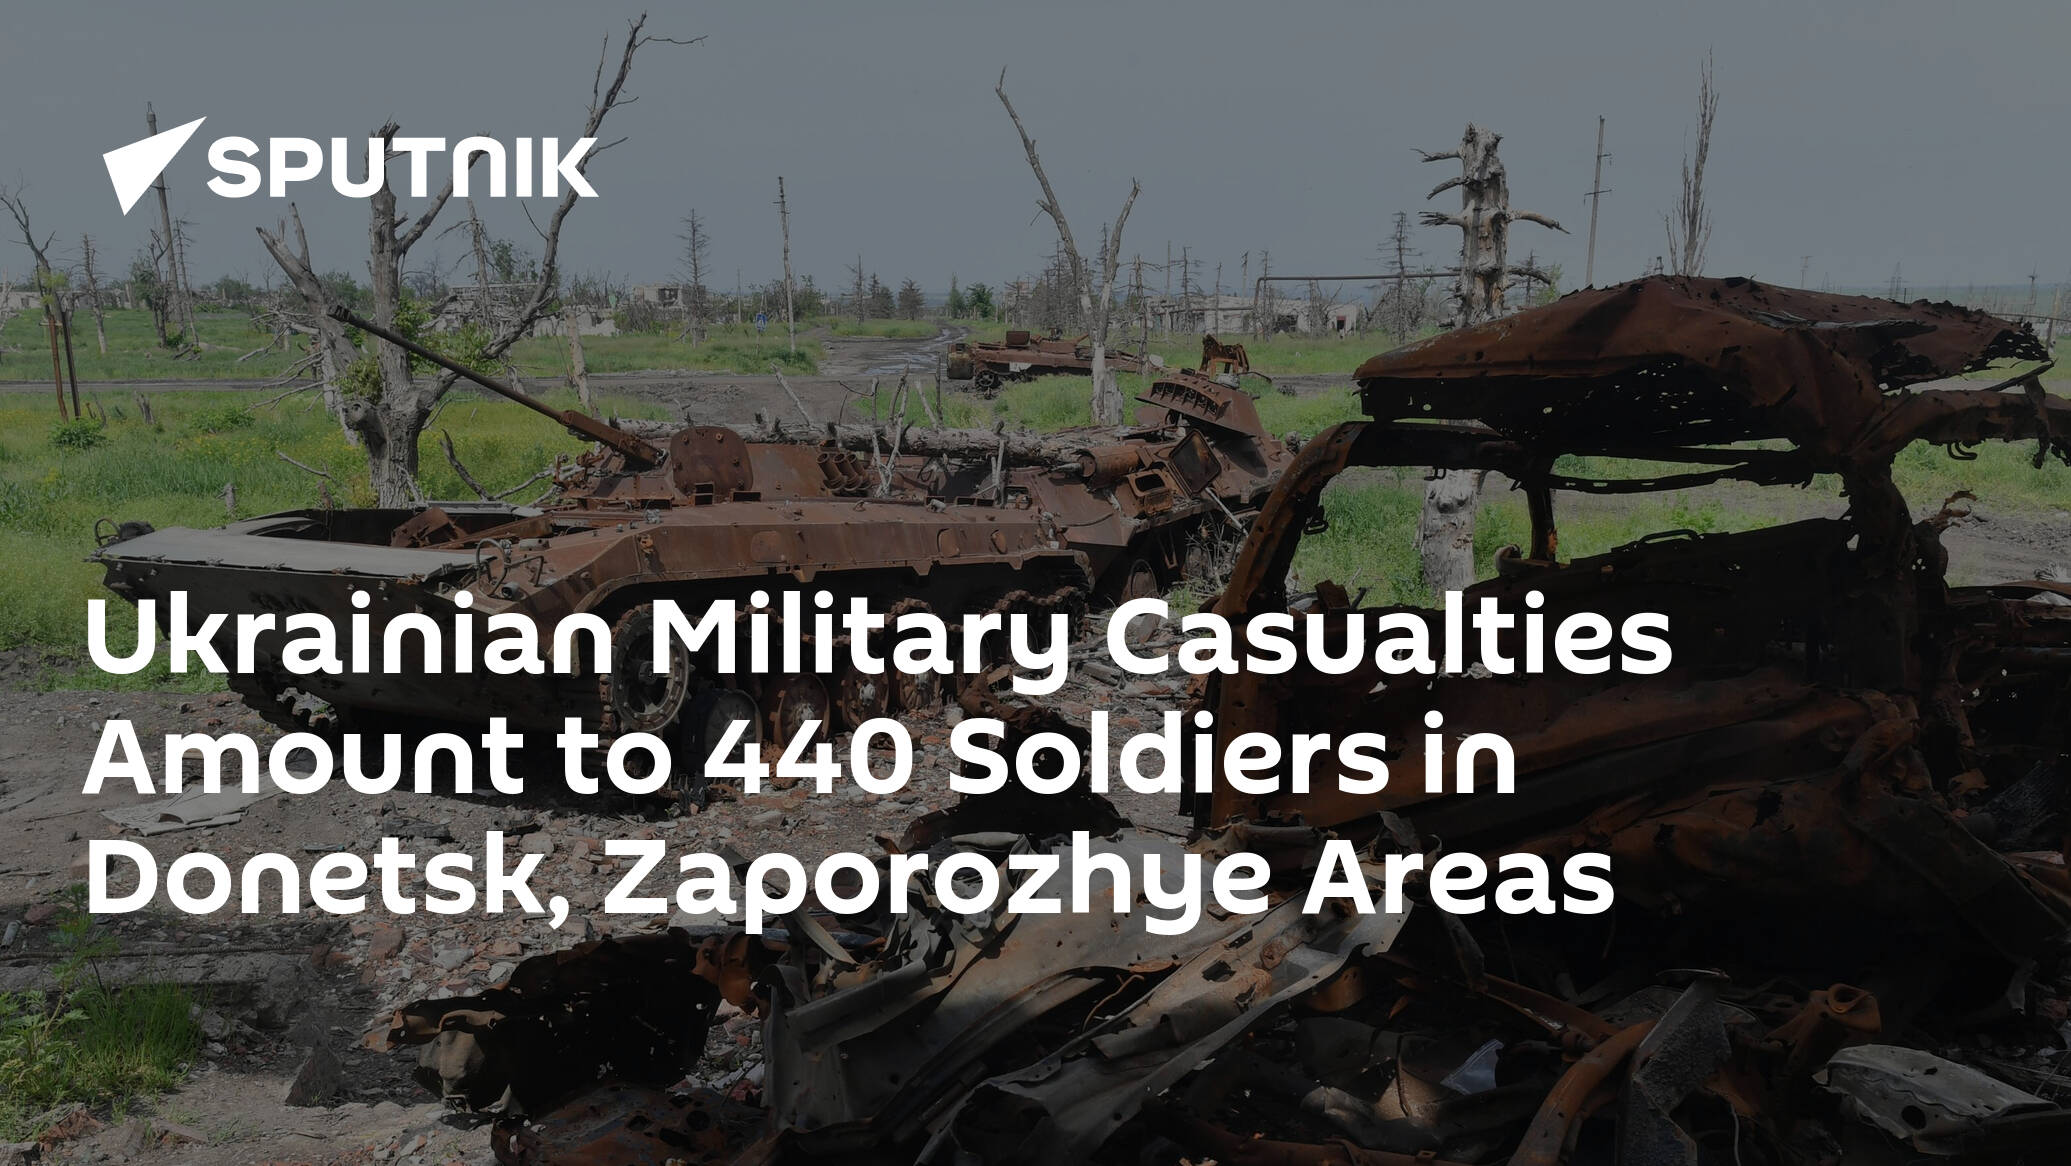 Ukrainian Military Casualties Amount to 440 Soldiers in Donetsk, Zaporozhye Areas